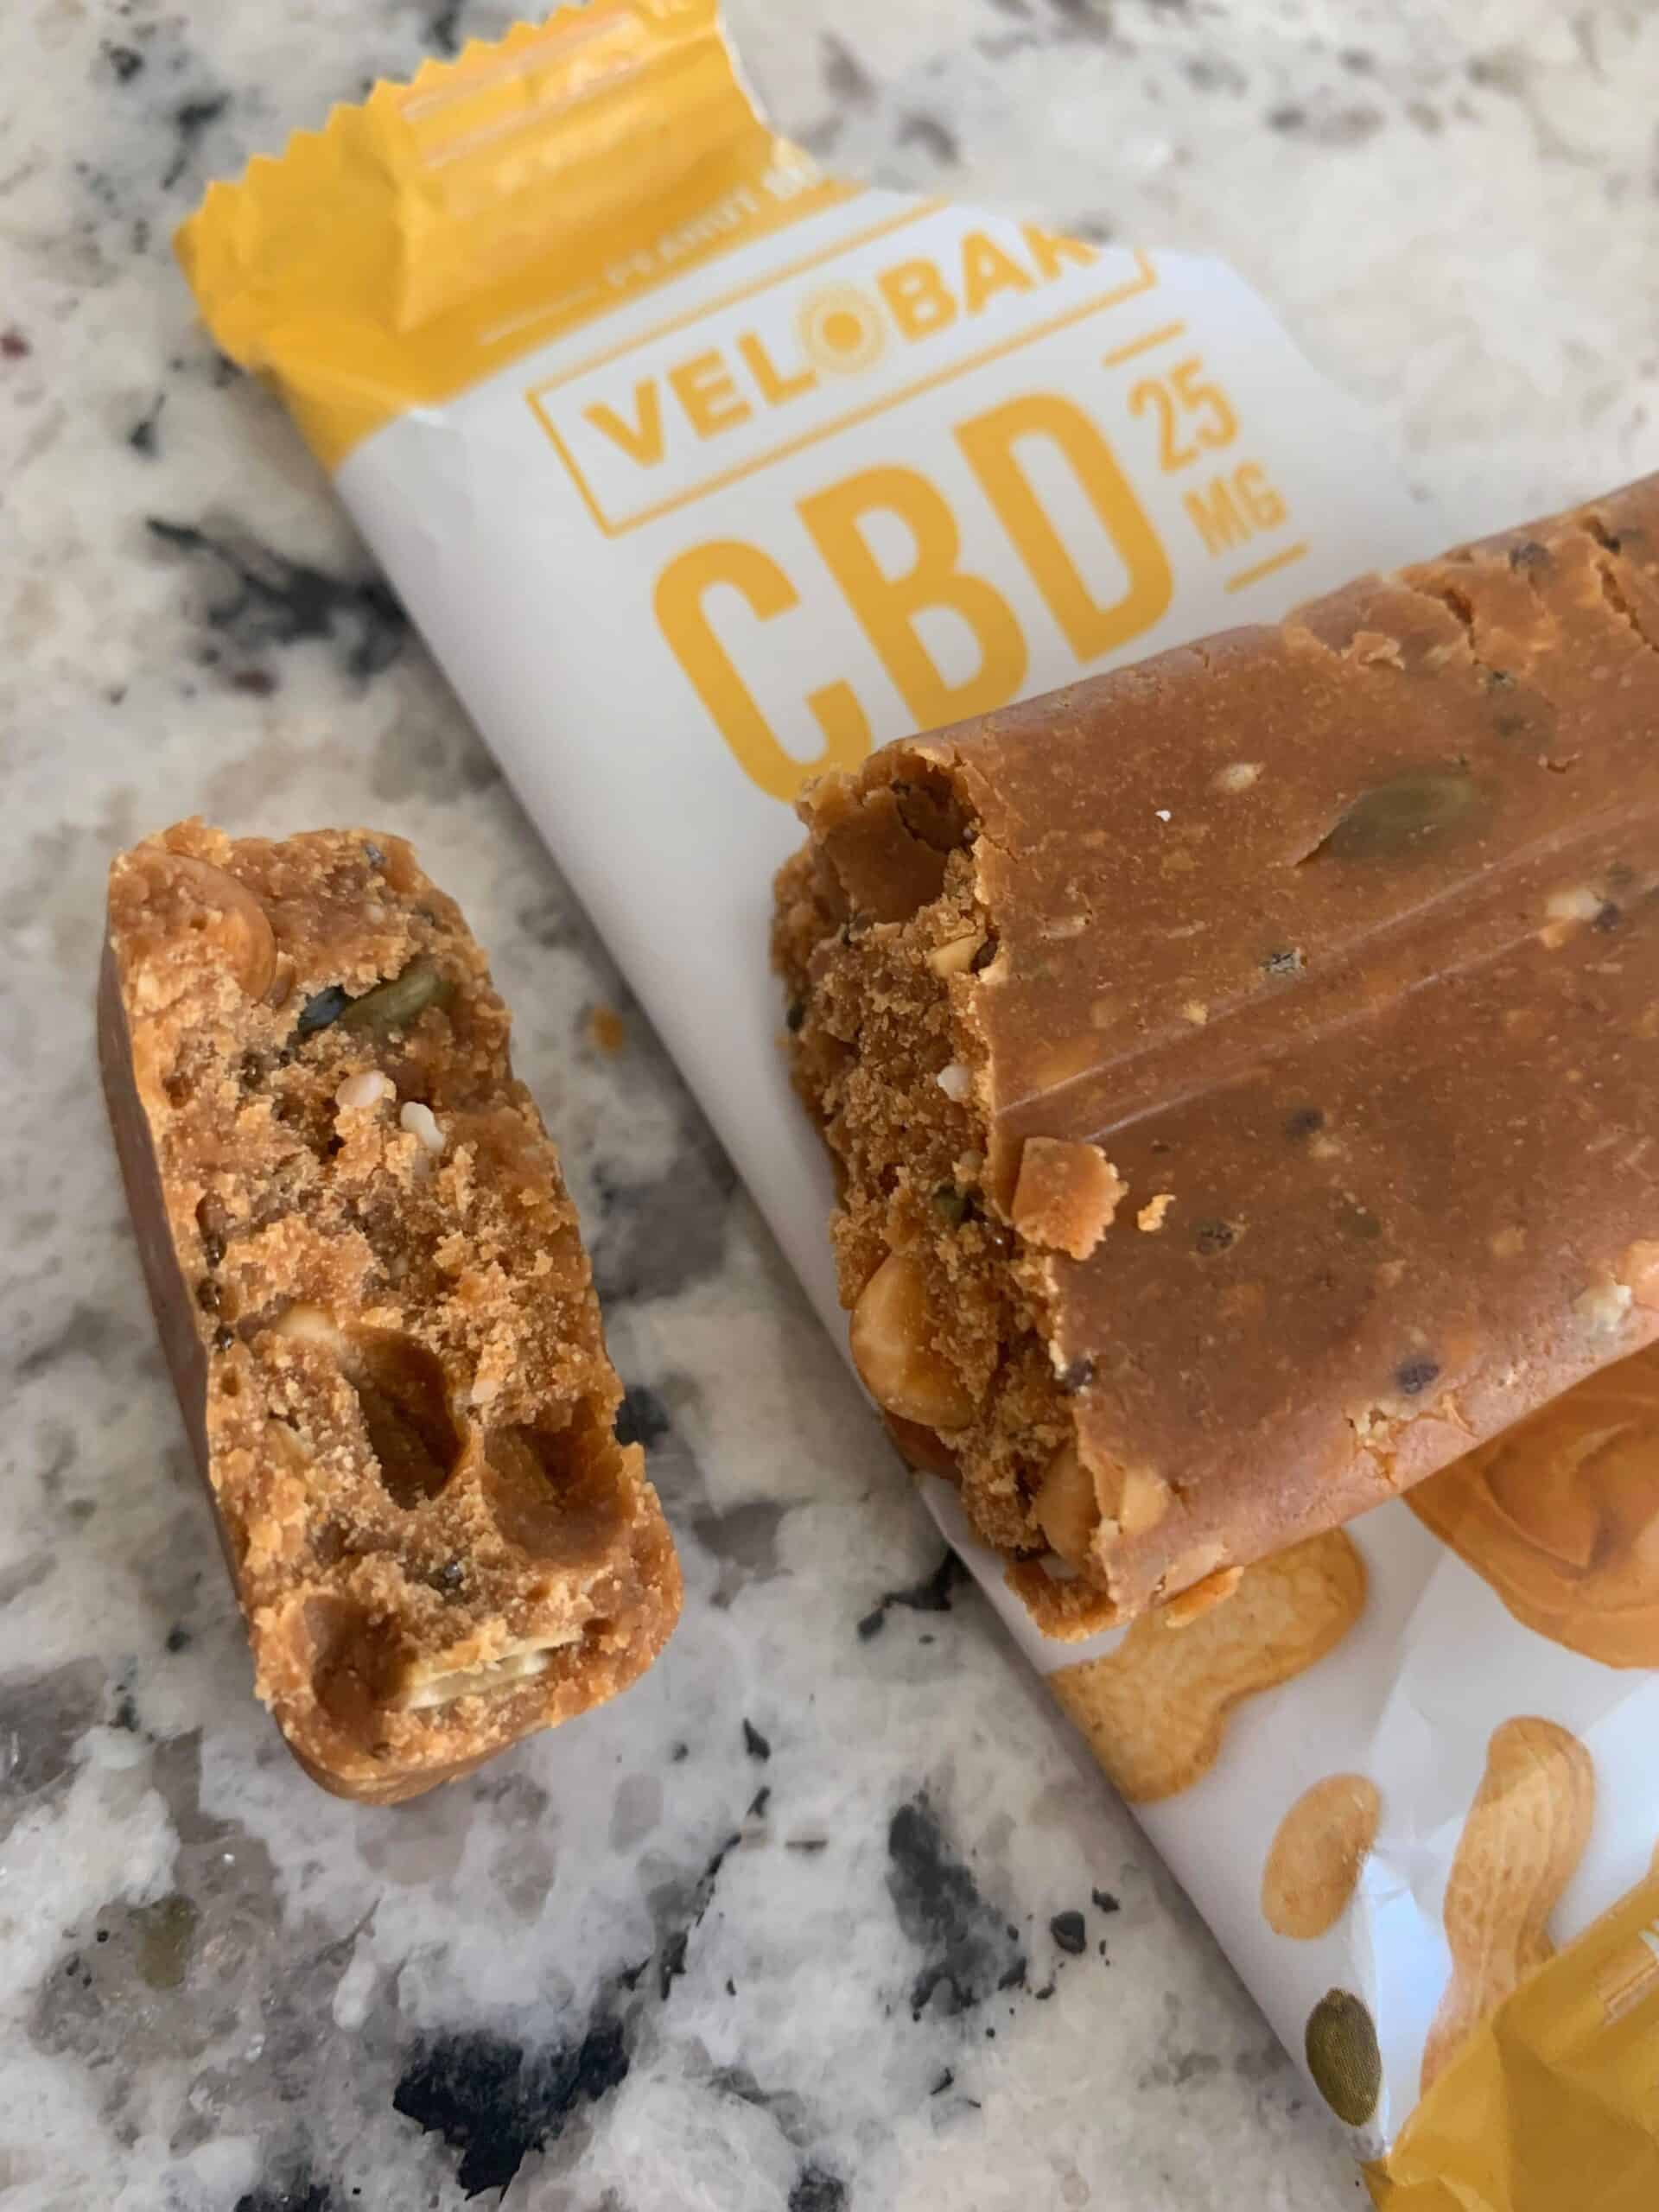 Velobar protein bar peanut butter save on cannabis about section